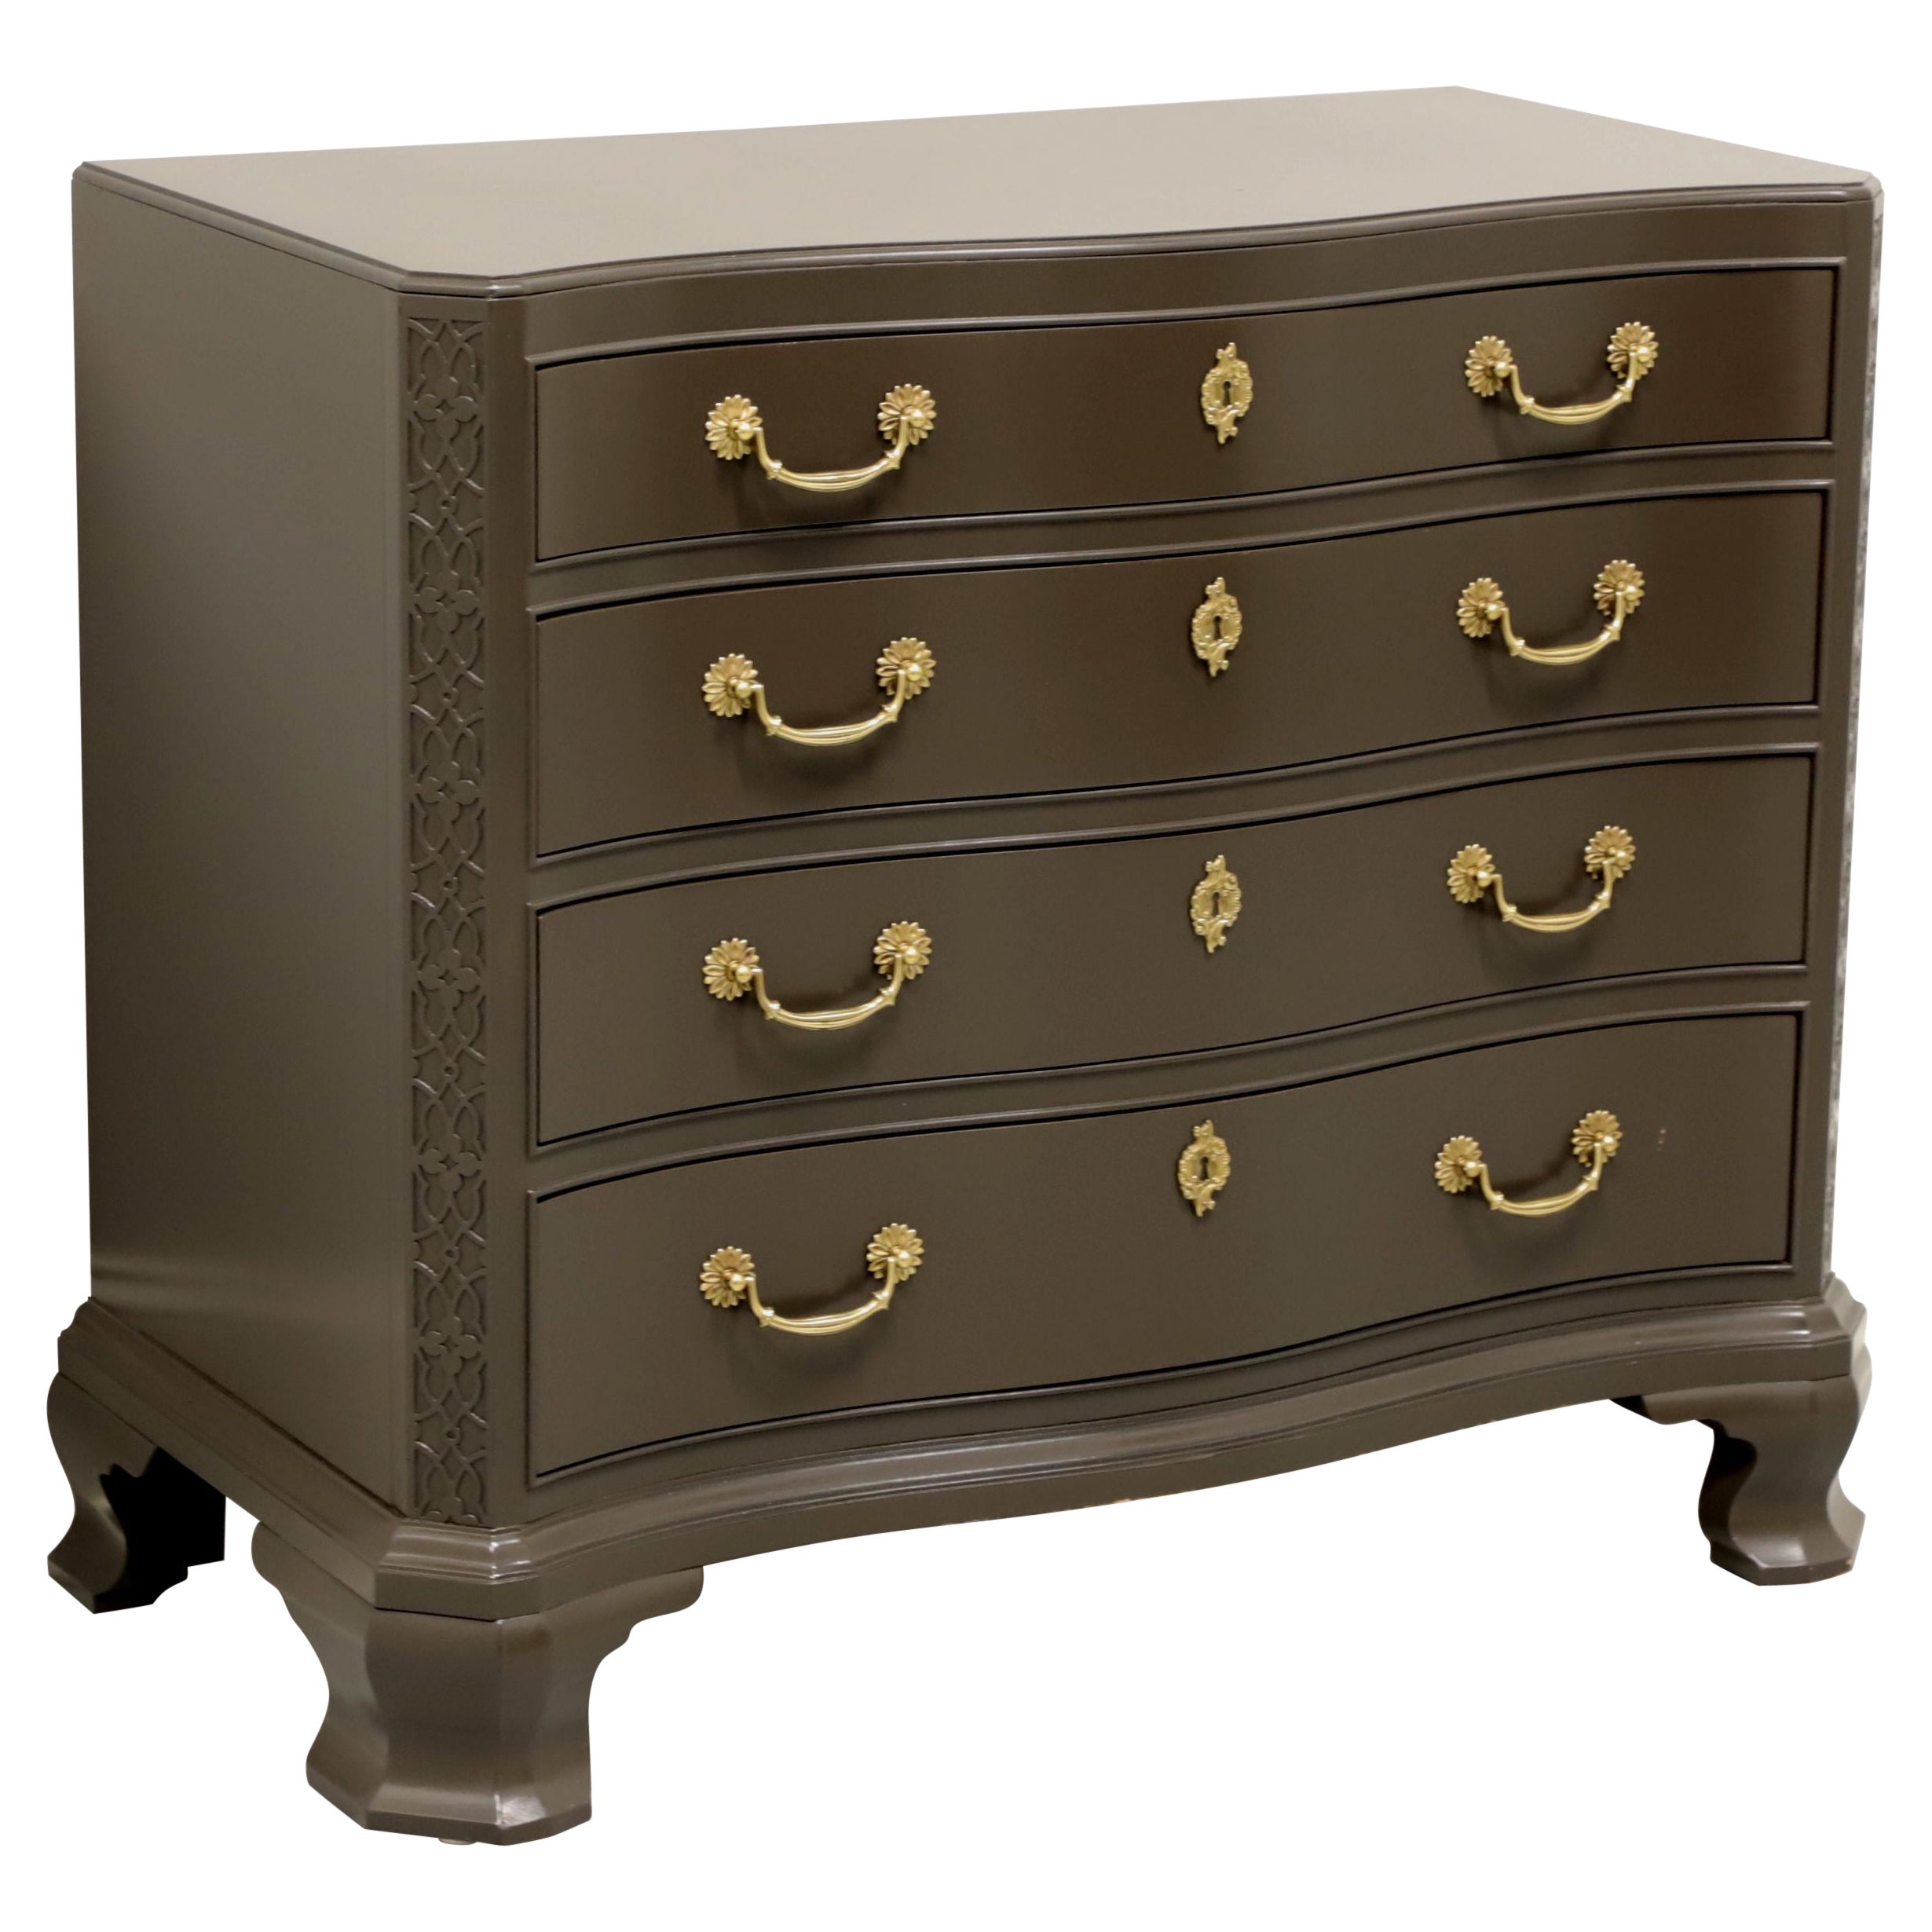 WHITE OF MEBANE Mahogany Chippendale Serpentine Gray Painted Bachelor Chest For Sale